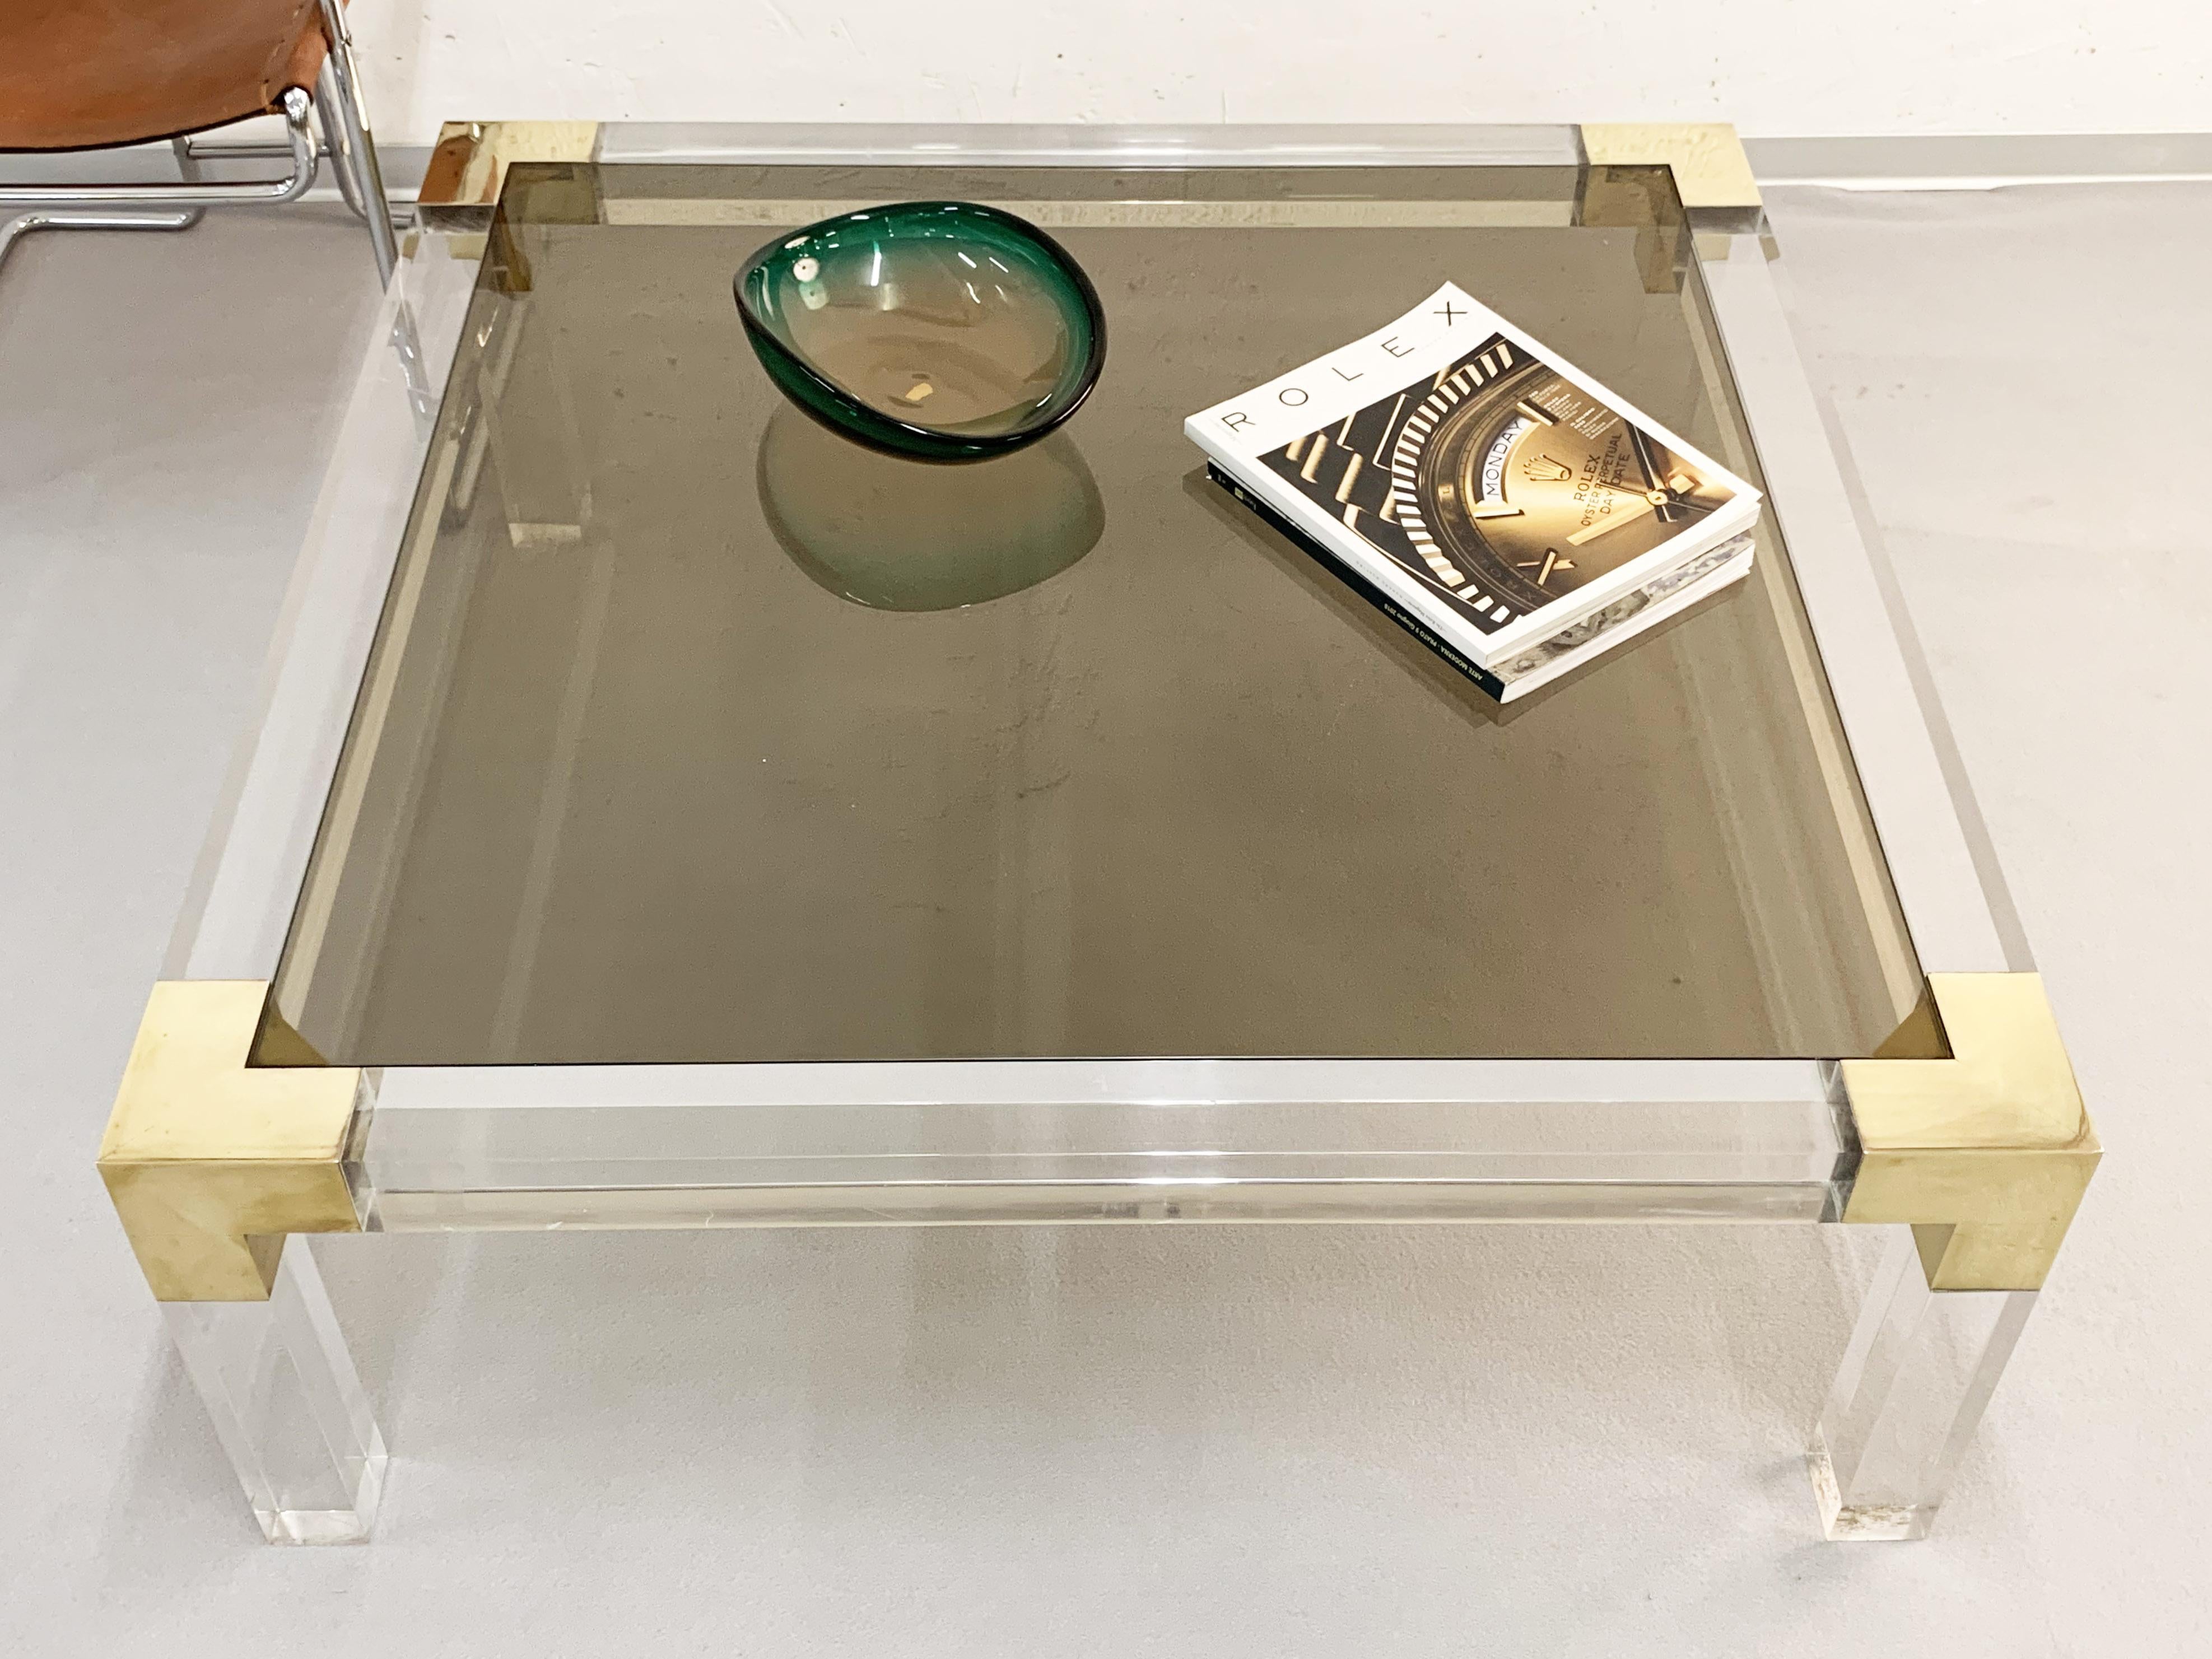 Italian Midcentury Square Coffee Table in Brass and Lucite, Smoked Glass Top Italy 1970s